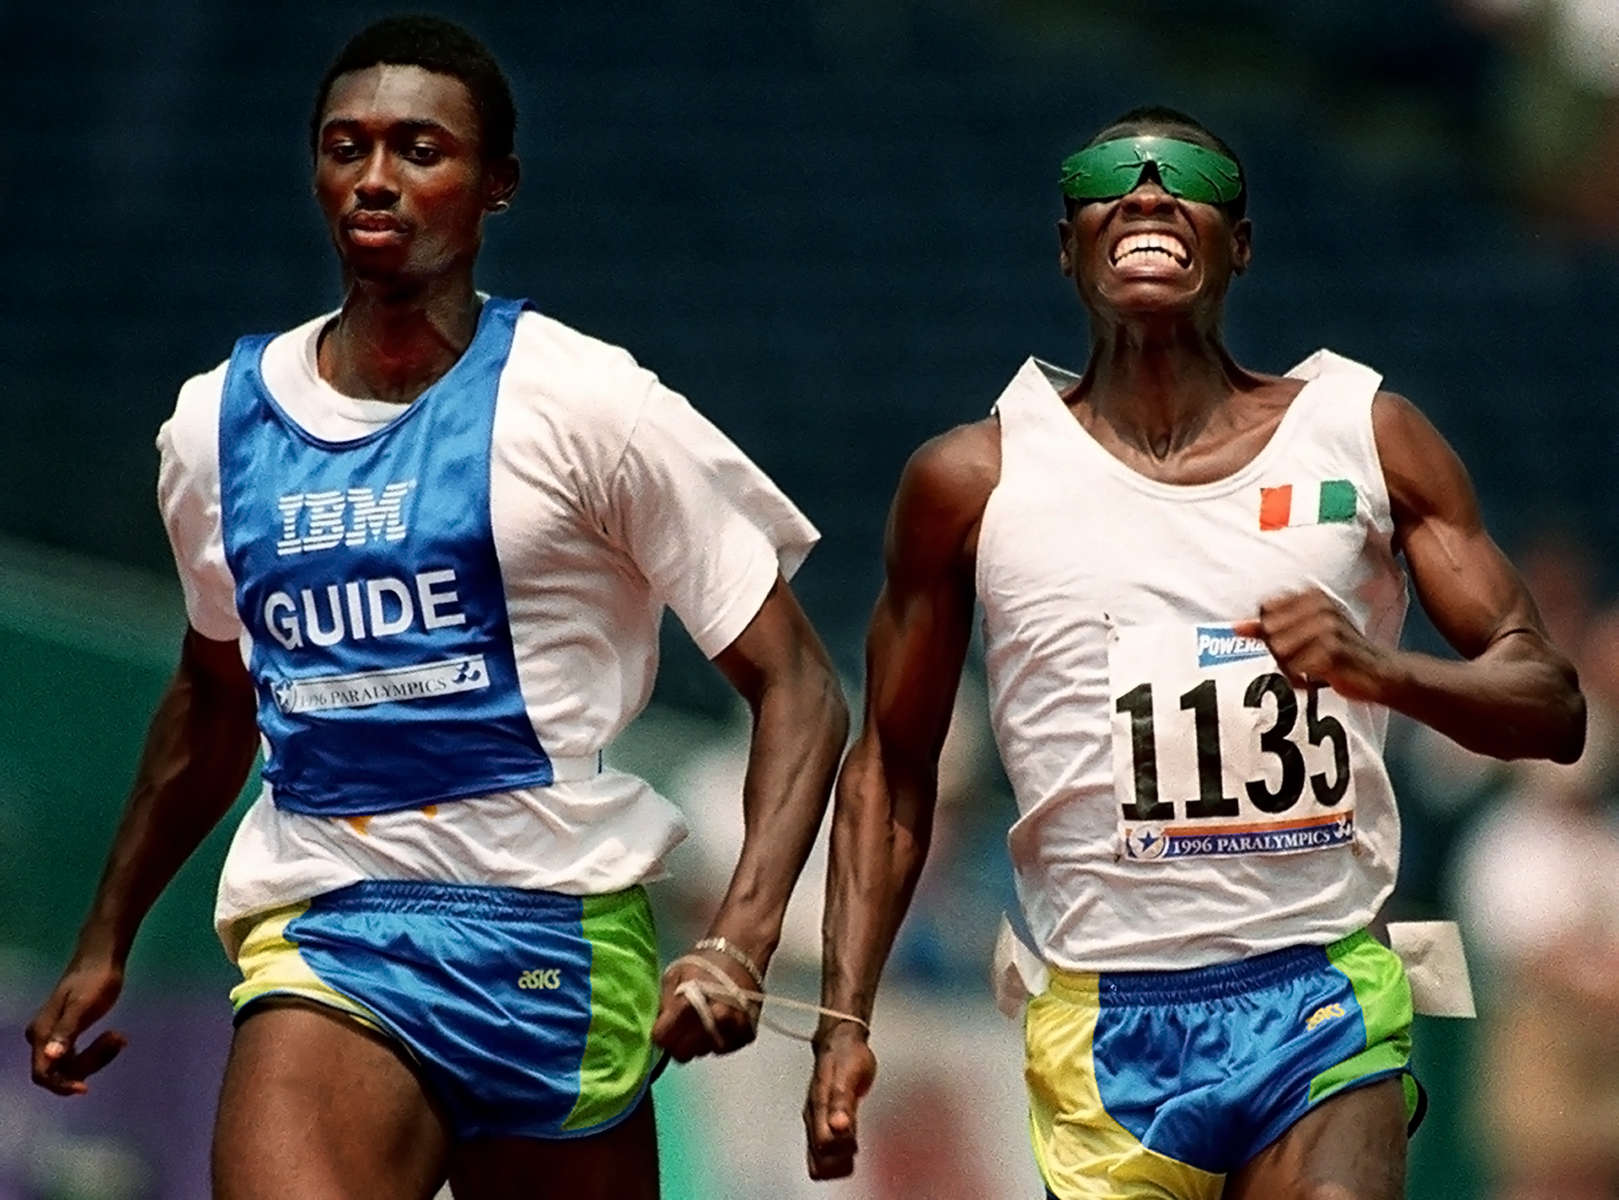 Gaston Tra Bi Yaly, of Côte d'Ivoire, competes in the 100m event for the blind with the help of a running guide. Yaly is joined to his guide using a rope attached around their hands.(The San Bernardino Sun/ Mark Zaleski) 